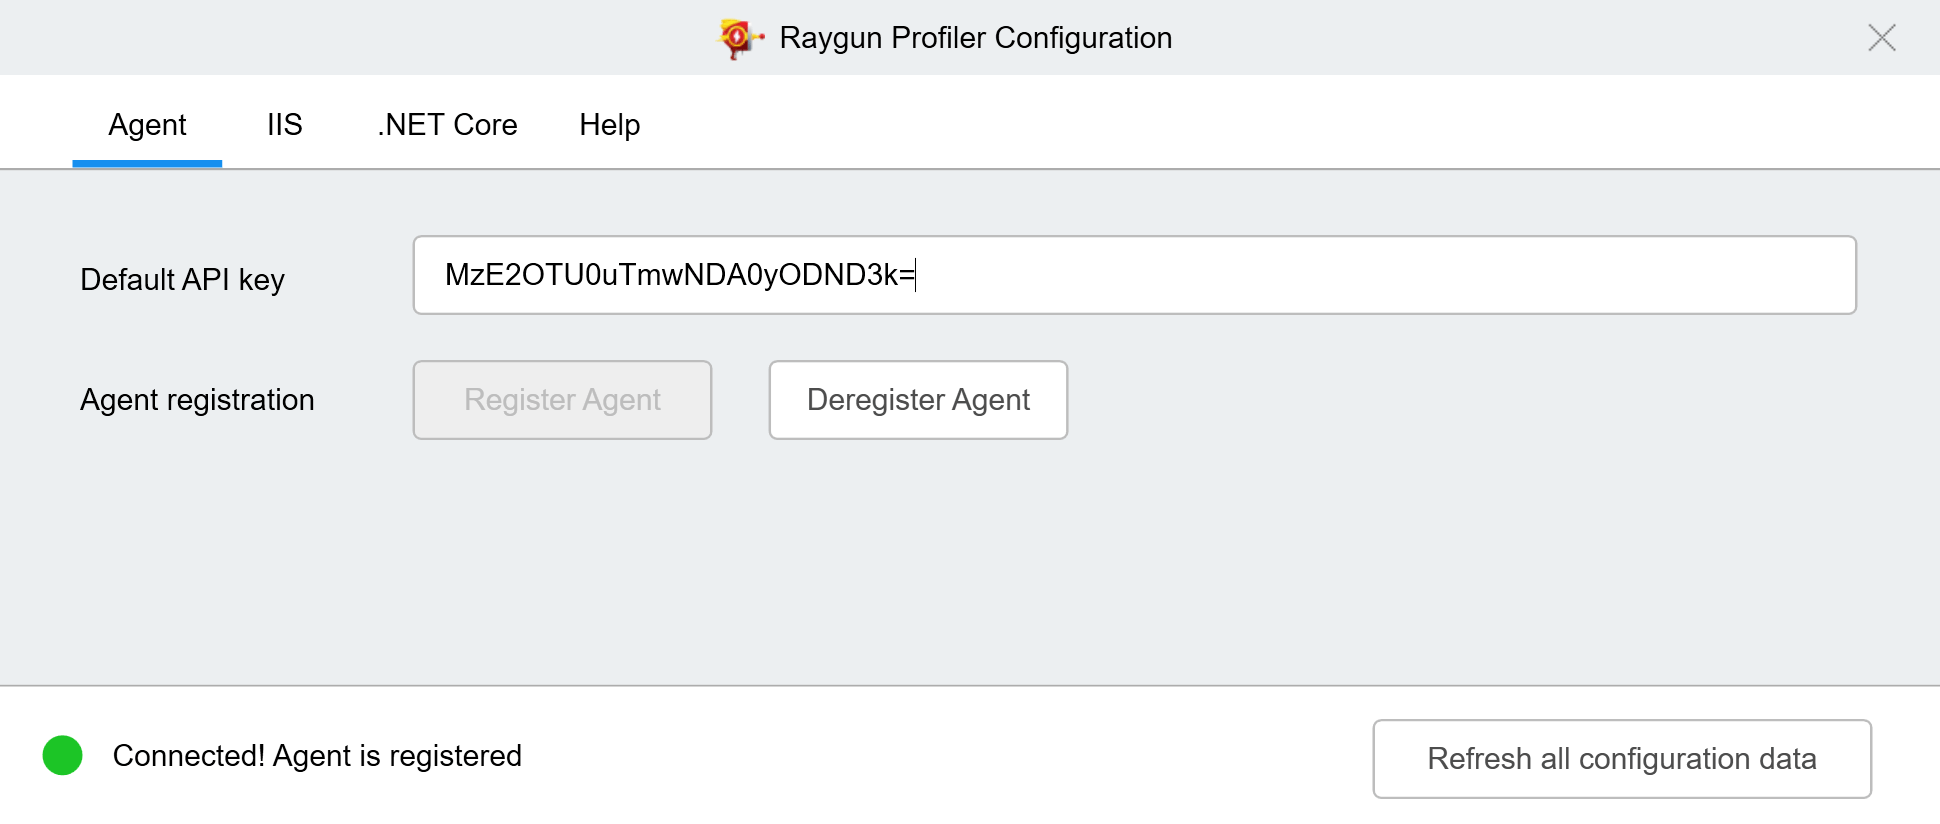 Registering the Raygun Agent with the profiler configuration tool